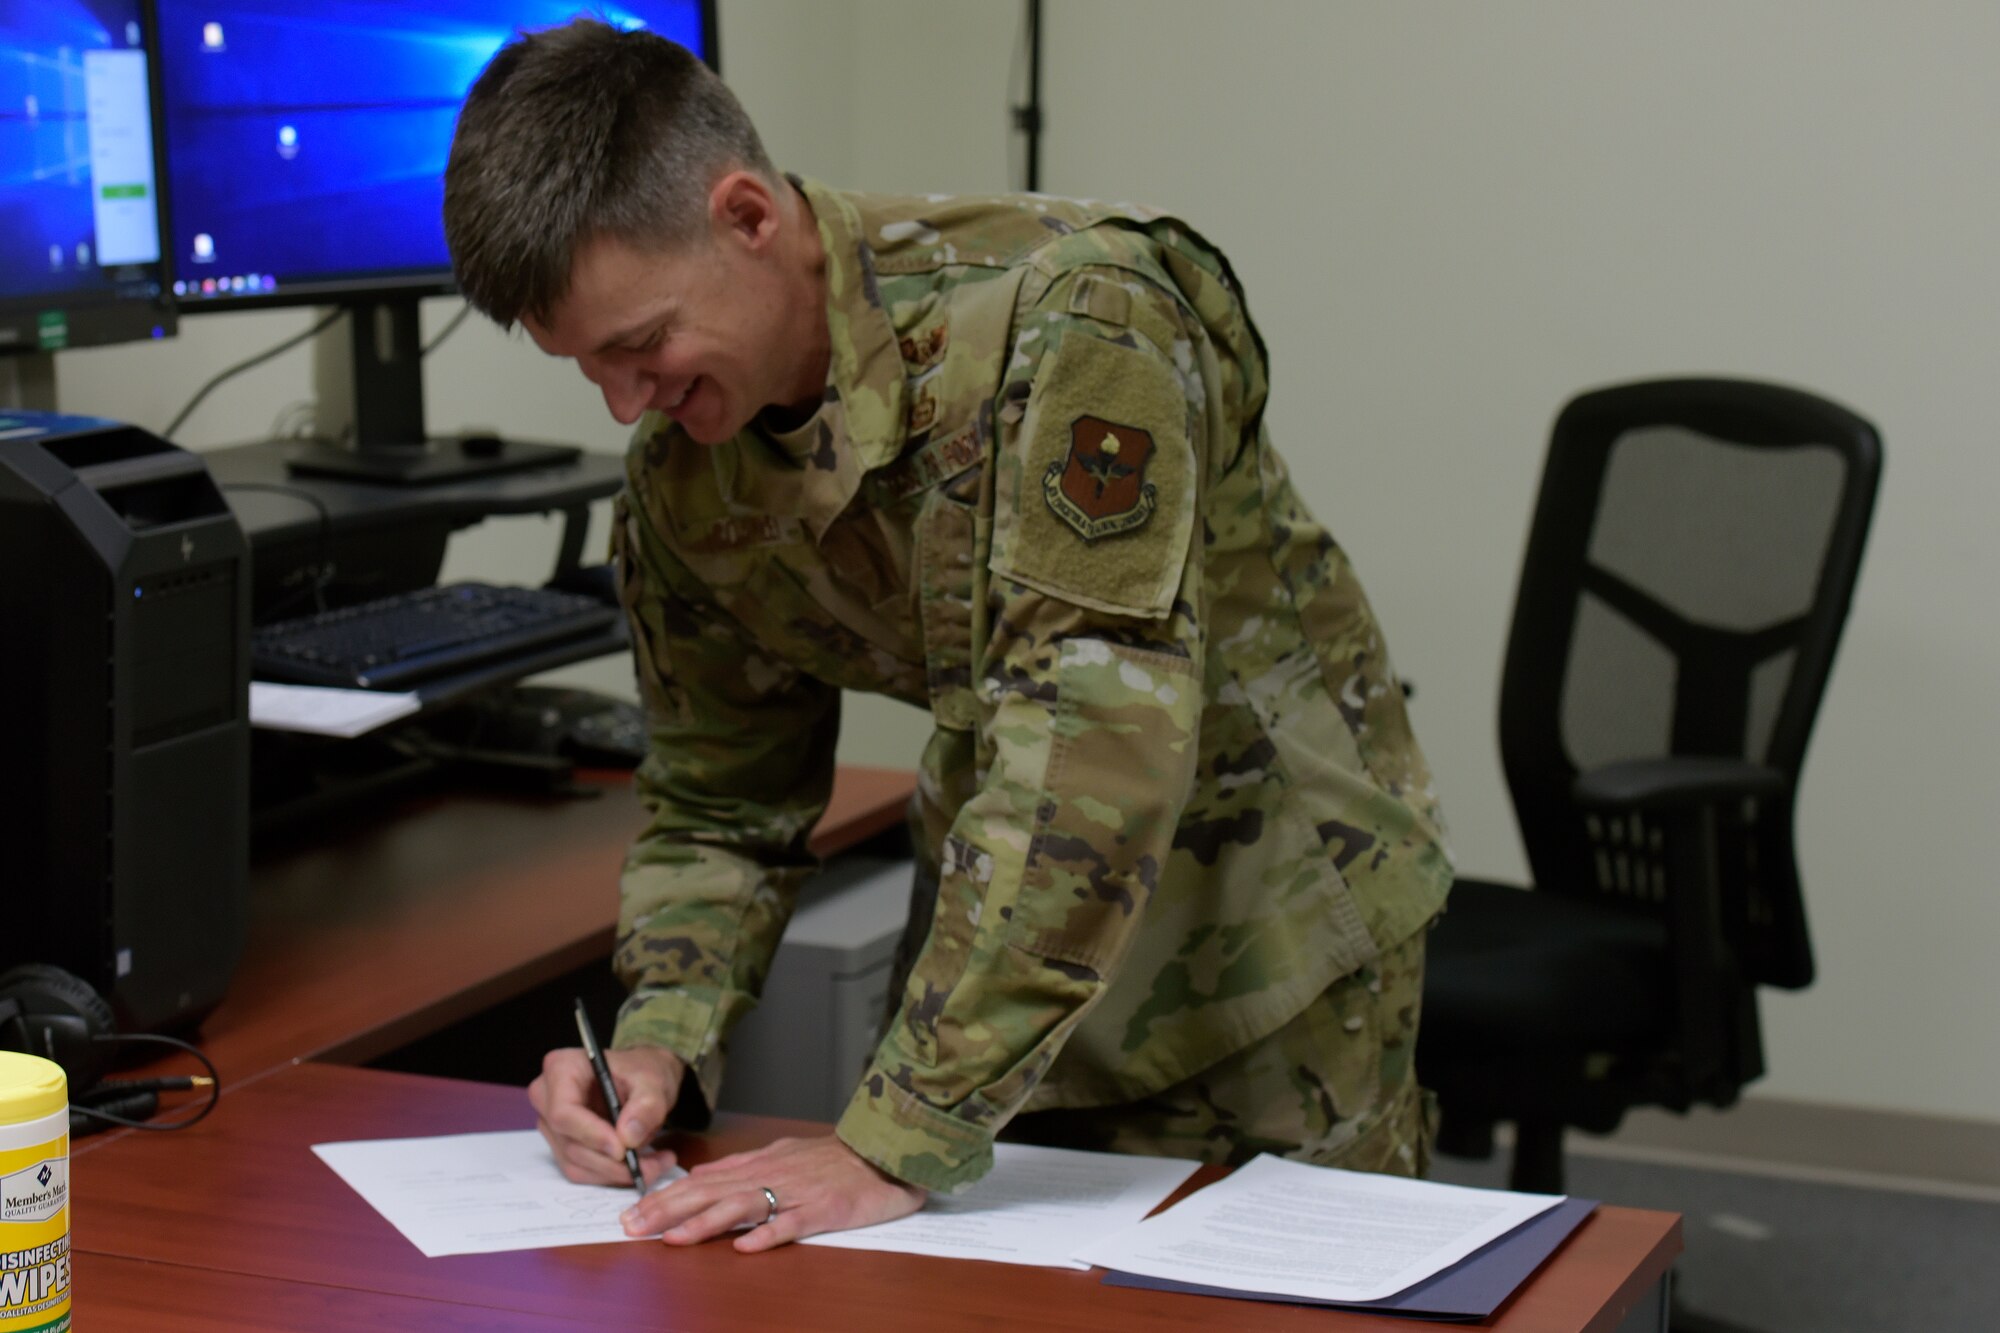 U.S. Air Force Col. Thomas Coakley, 17th Training Group commander, physically signs a Memorandum of Understanding, which creates the Center for Teaching and Learning Excellence for shared professional development between the San Angelo community and members of Goodfellow, during a video call conference in the Brandenburg Hall on Goodfellow Air Force Base, Texas, June 11, 2020. Per the National Defense Strategy, the facility’s development was a multi-level collaboration to build lifelong learners. (U.S. Air Force photo by Senior Airman Zachary Chapman)